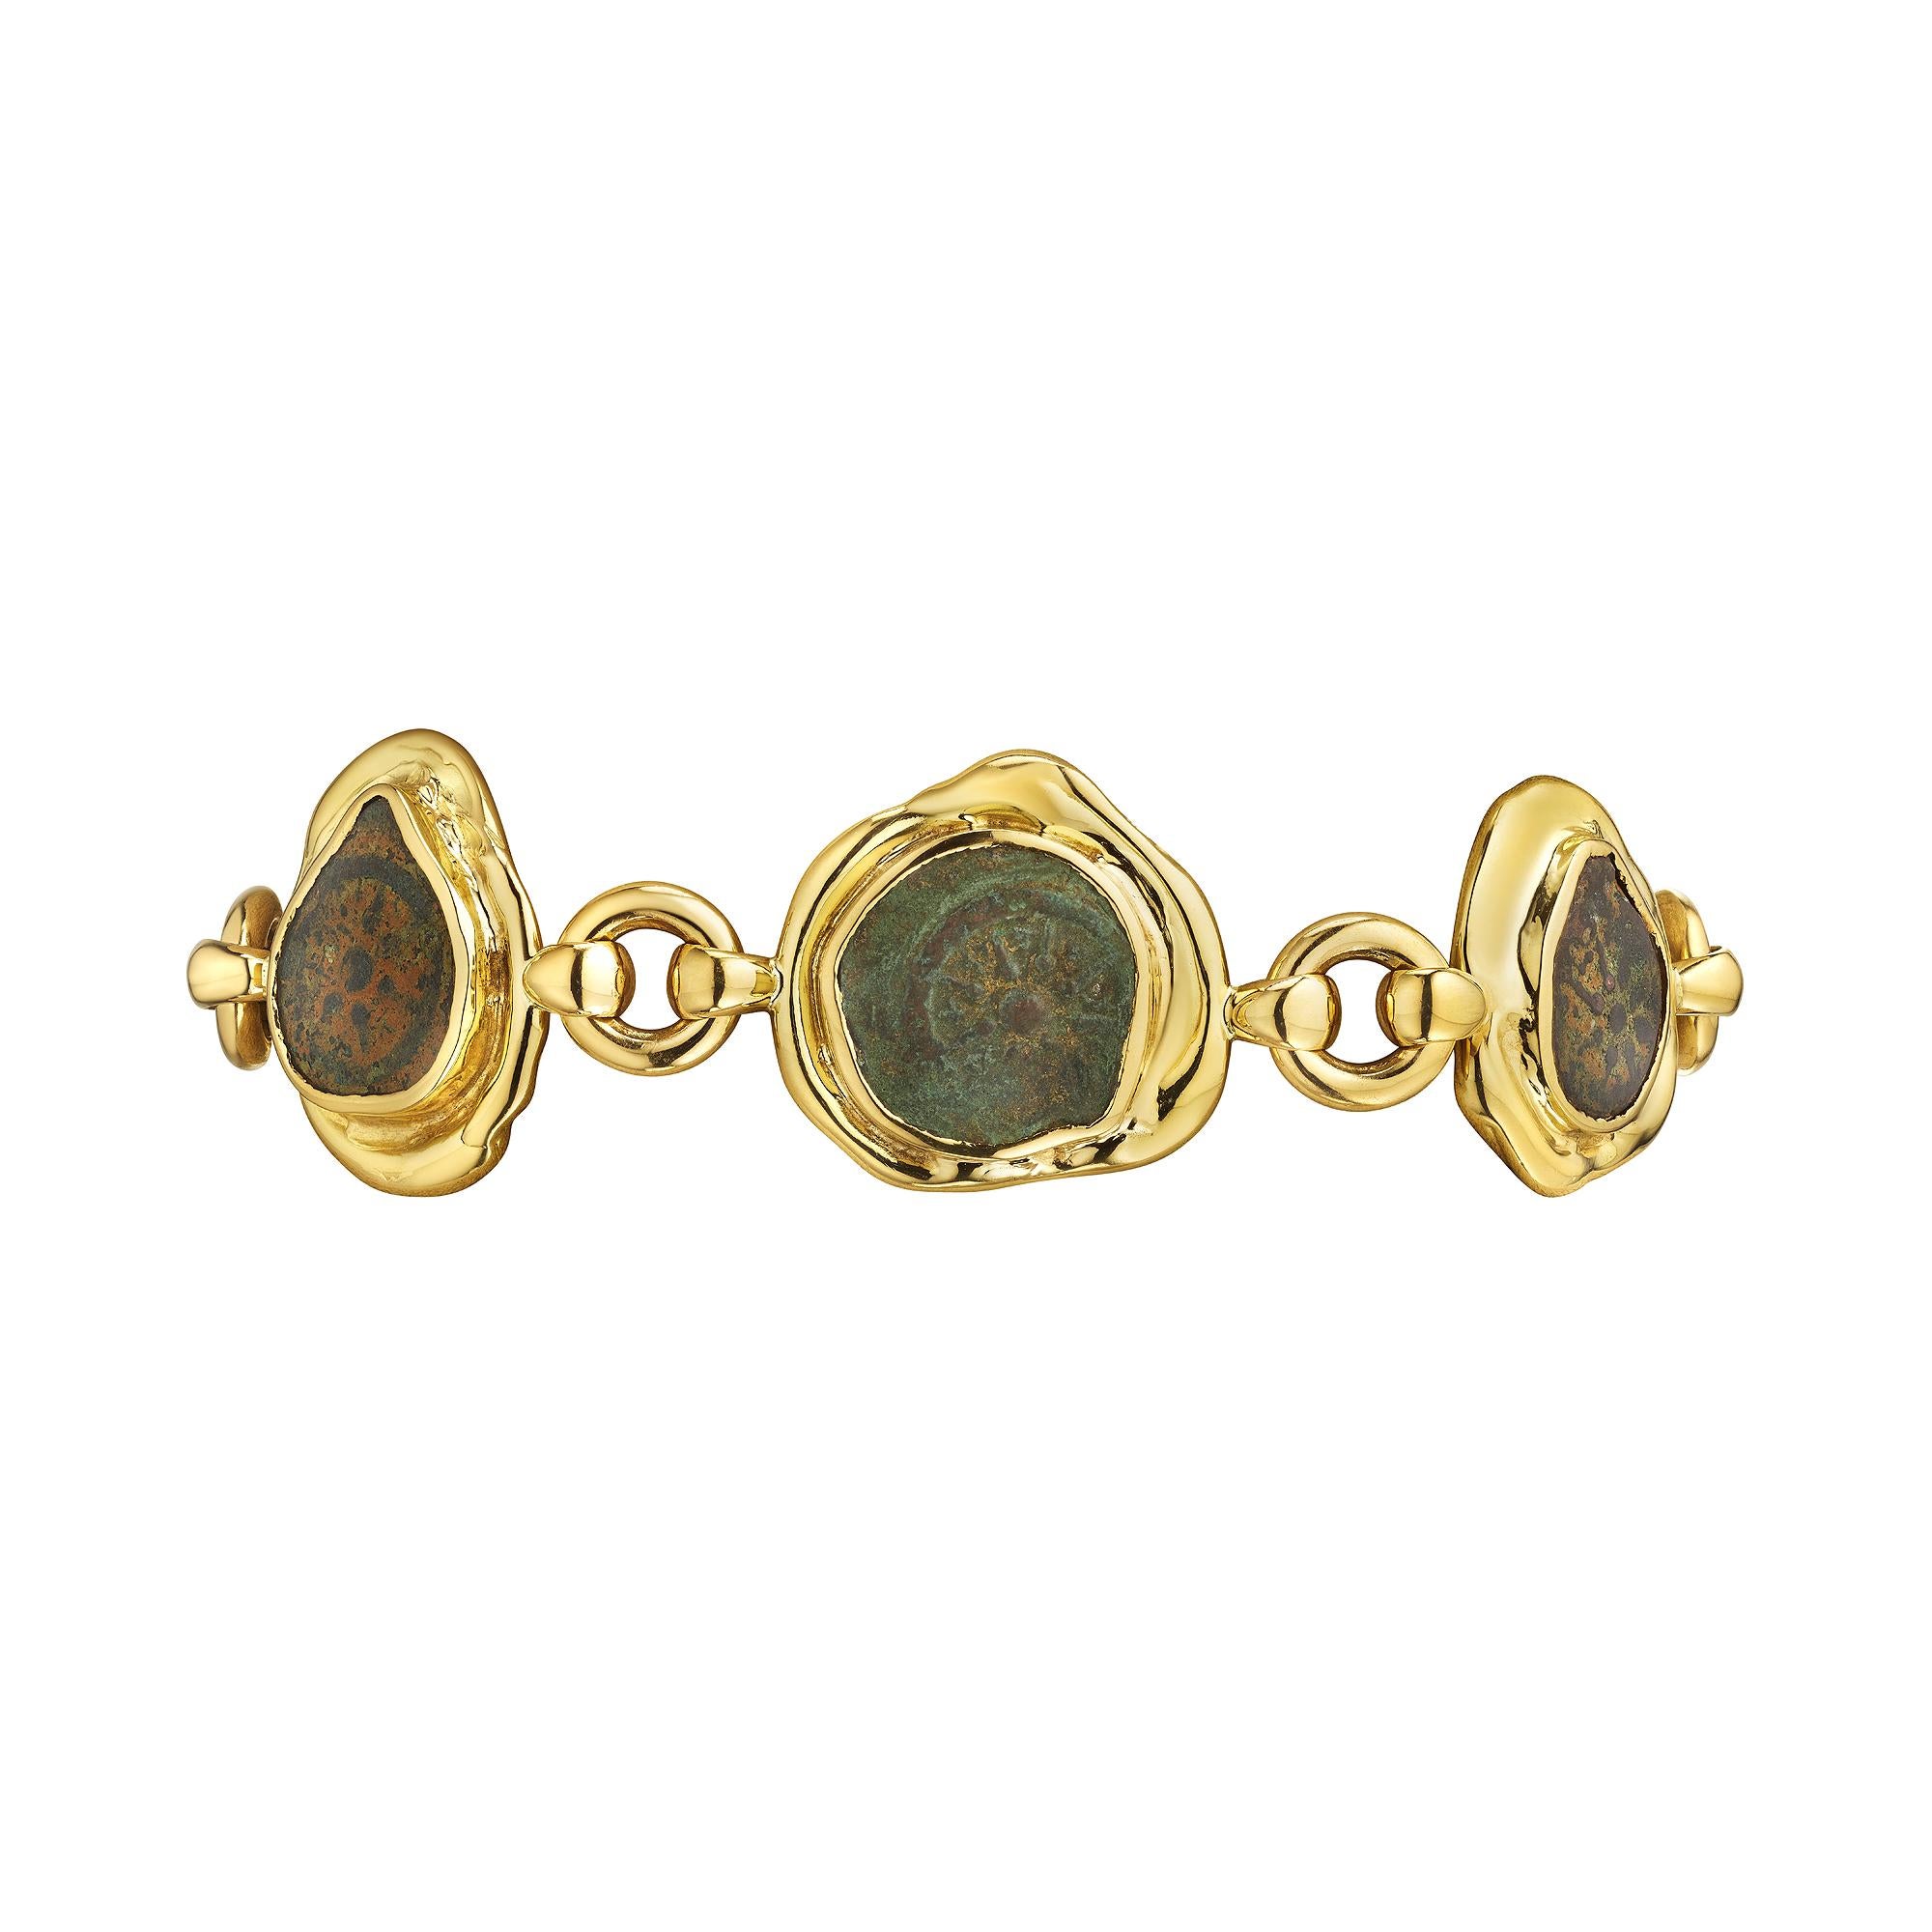 Wear a part of the past with this Elizabeth Gage ancient Hasmonean bronze coin gold link bracelet.  With six ancient coins, dating from 103 to 76 B.C. and organically framed in polished 18 karat yellow gold, this one-of-a-kind link bracelet is the